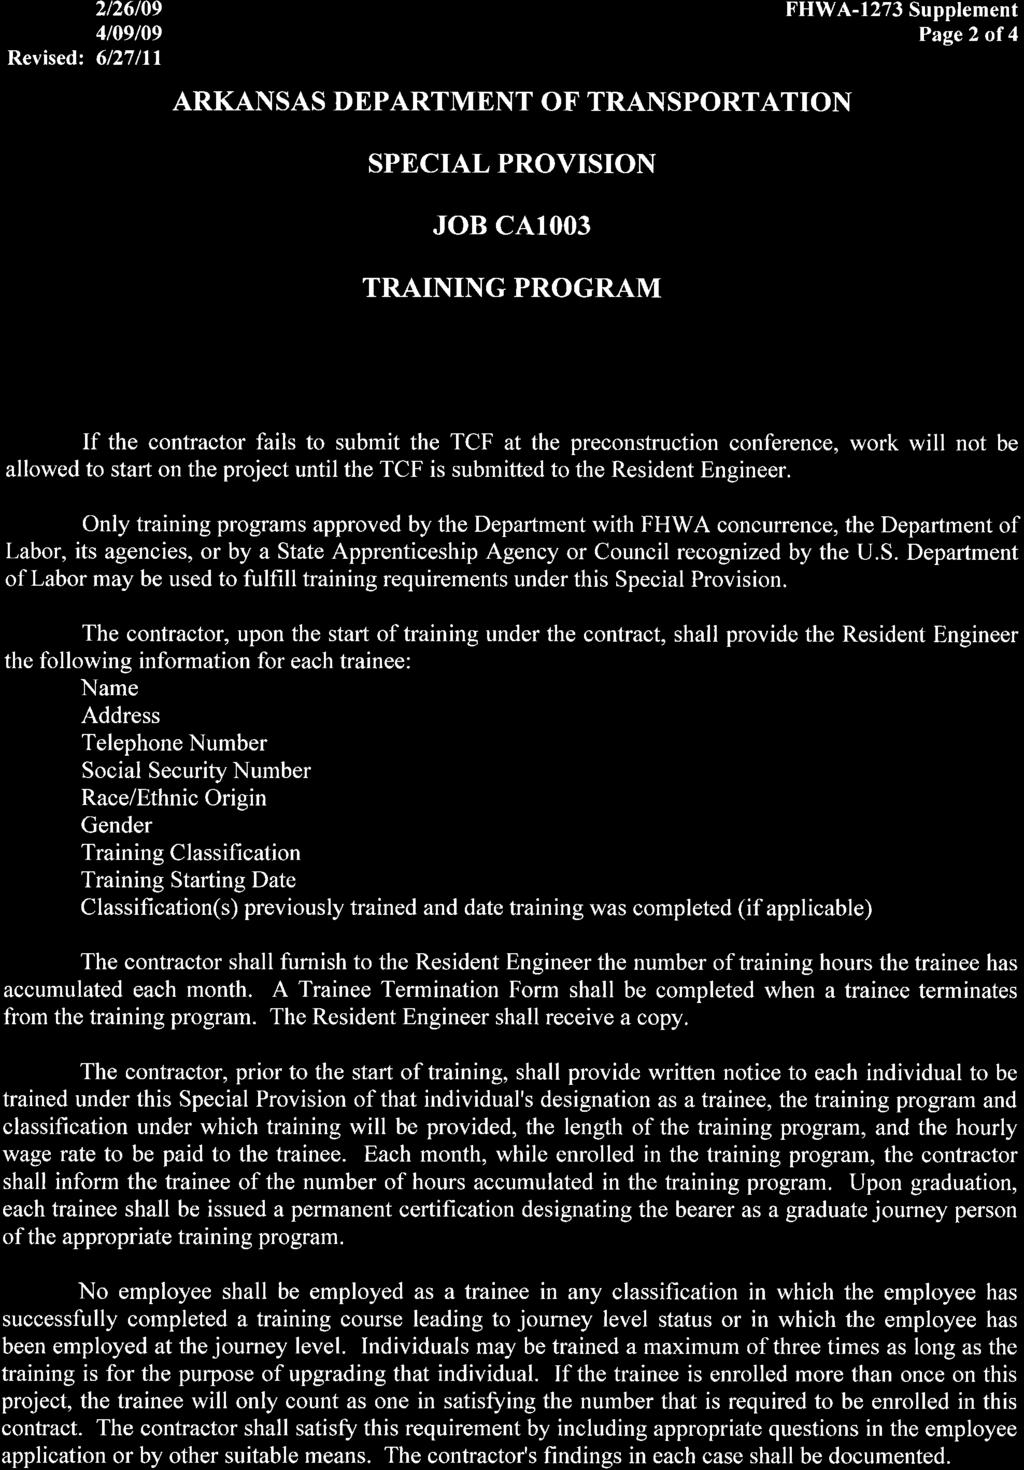 2/26/09 4/09/09 Revised: 6/27lll SPECIAL PROVISION JOB CA1OO3 TRAINING PROGRAM FHWA-1273 Supplement Page 2 of 4 If the contractor fails to submit the TCF at the preconstruction conference, work will